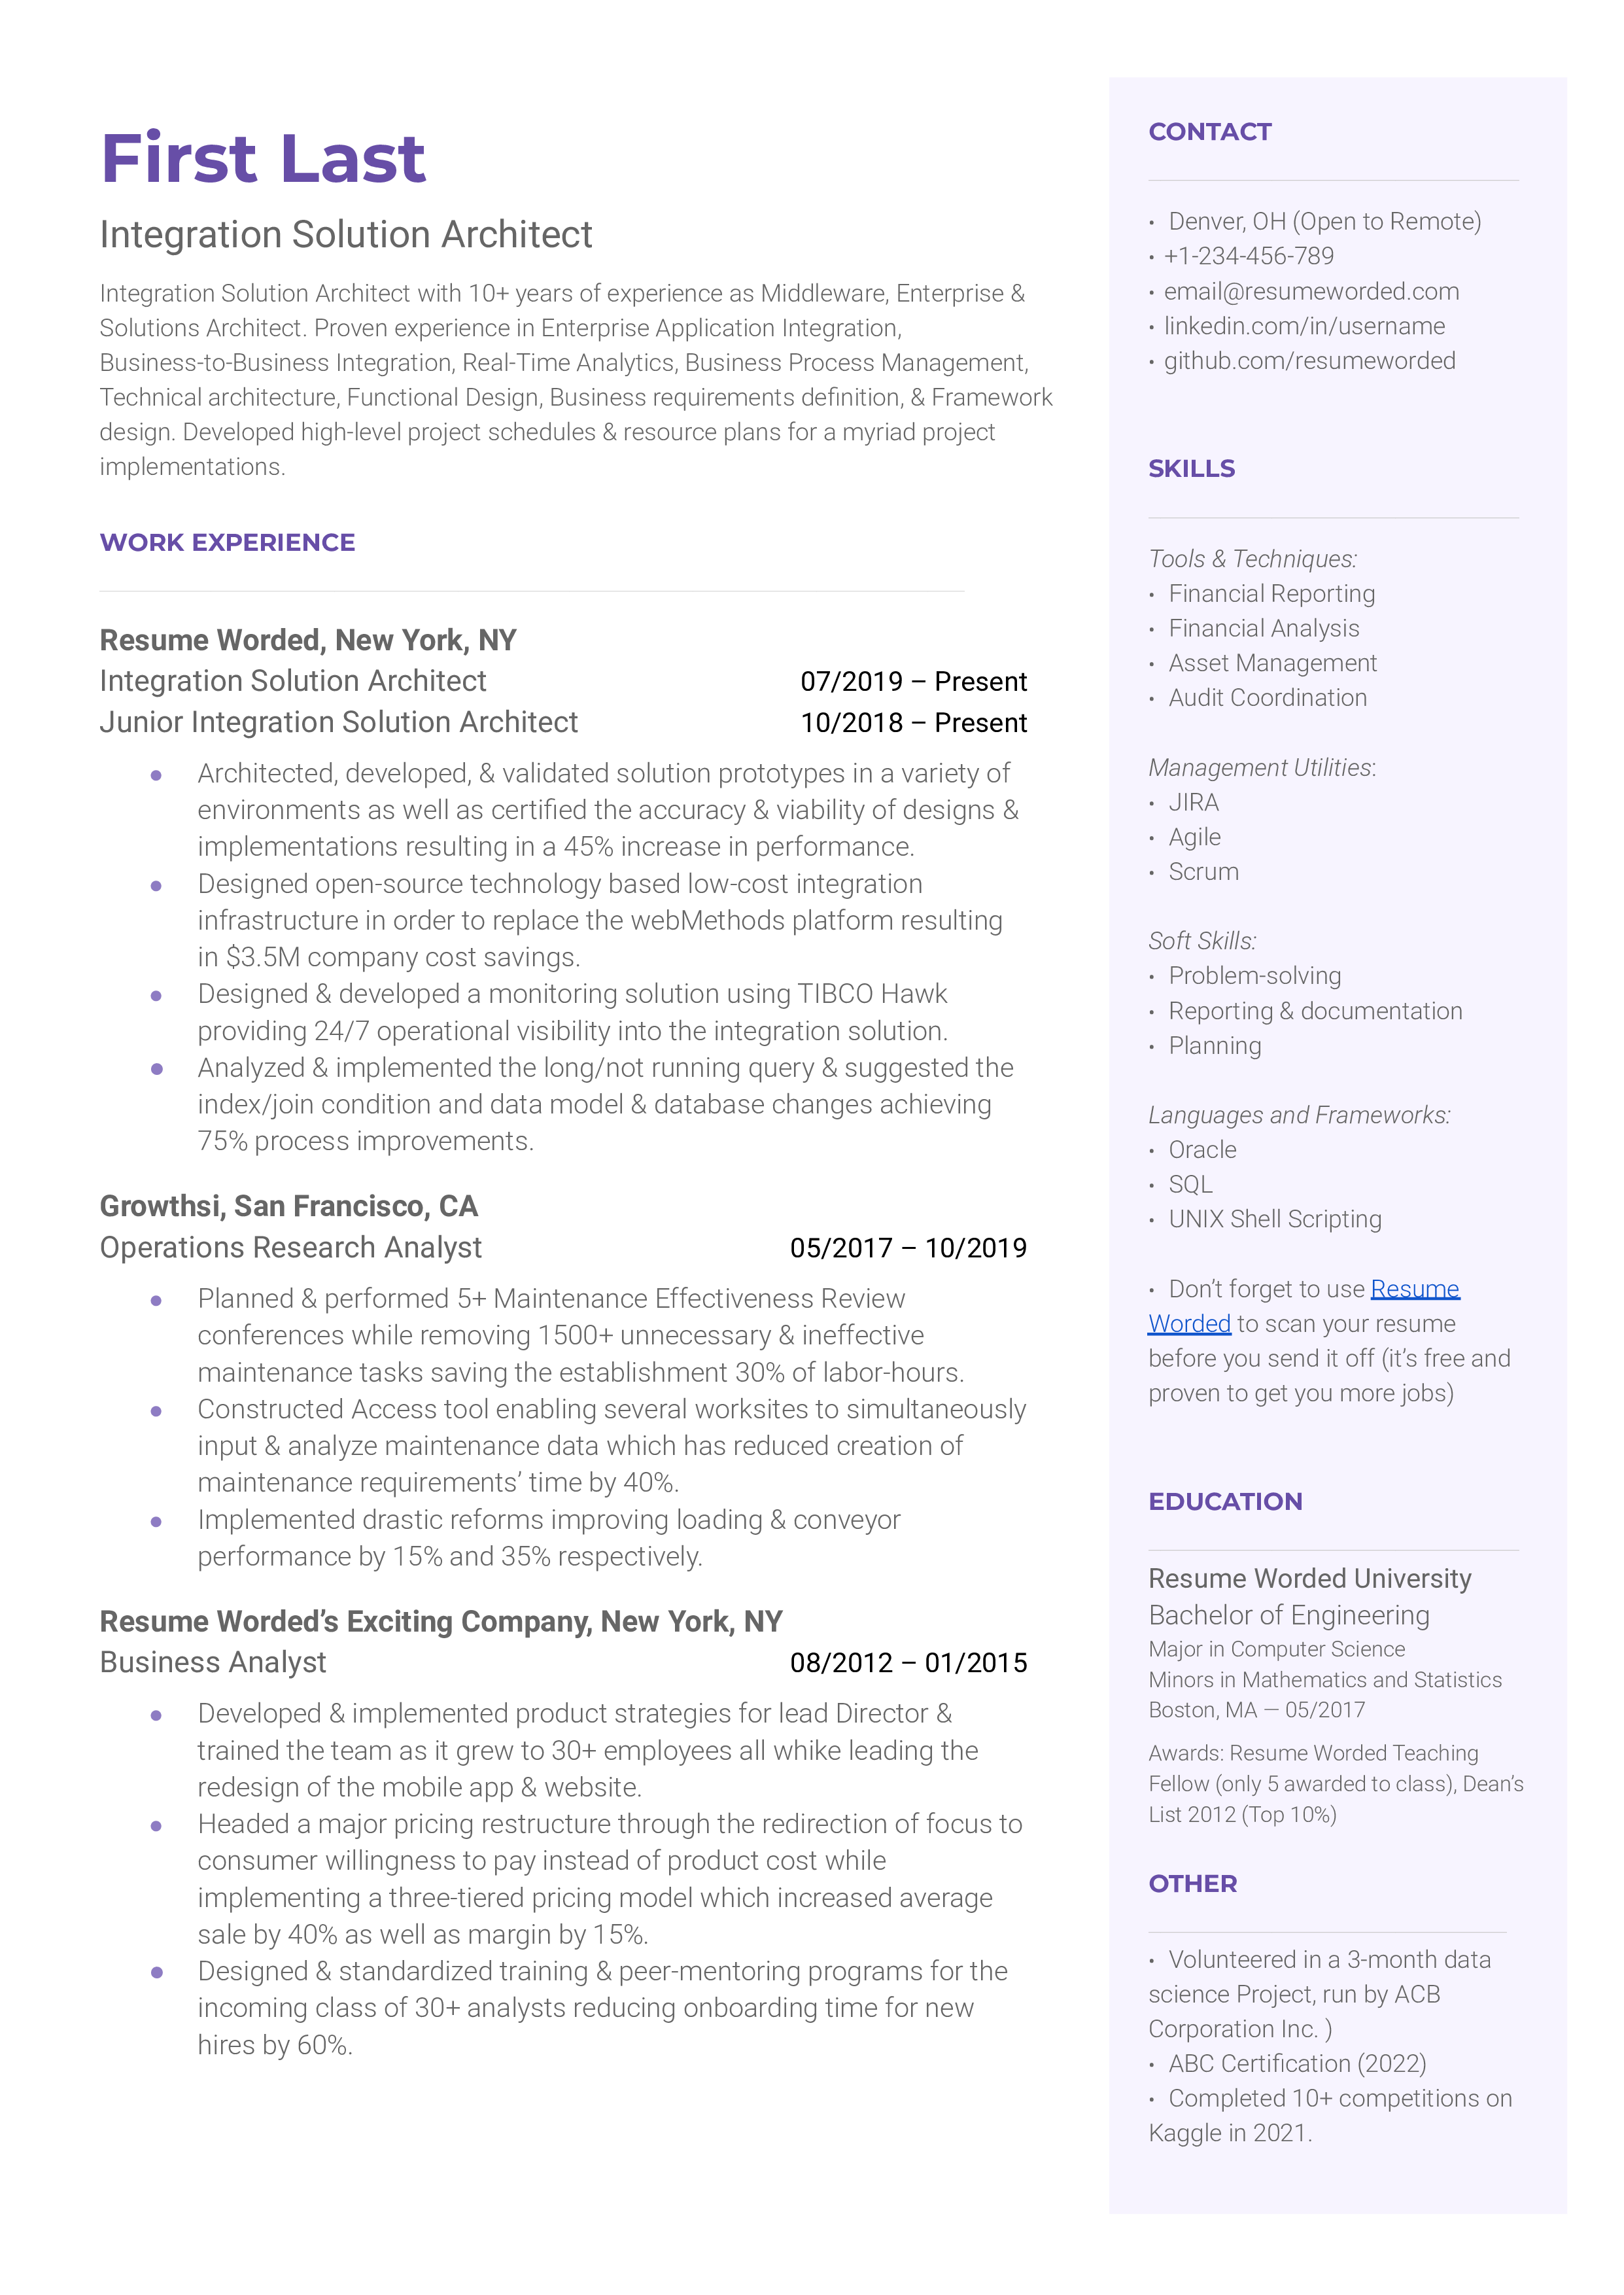 Integration Solution Architect Resume Template + Example